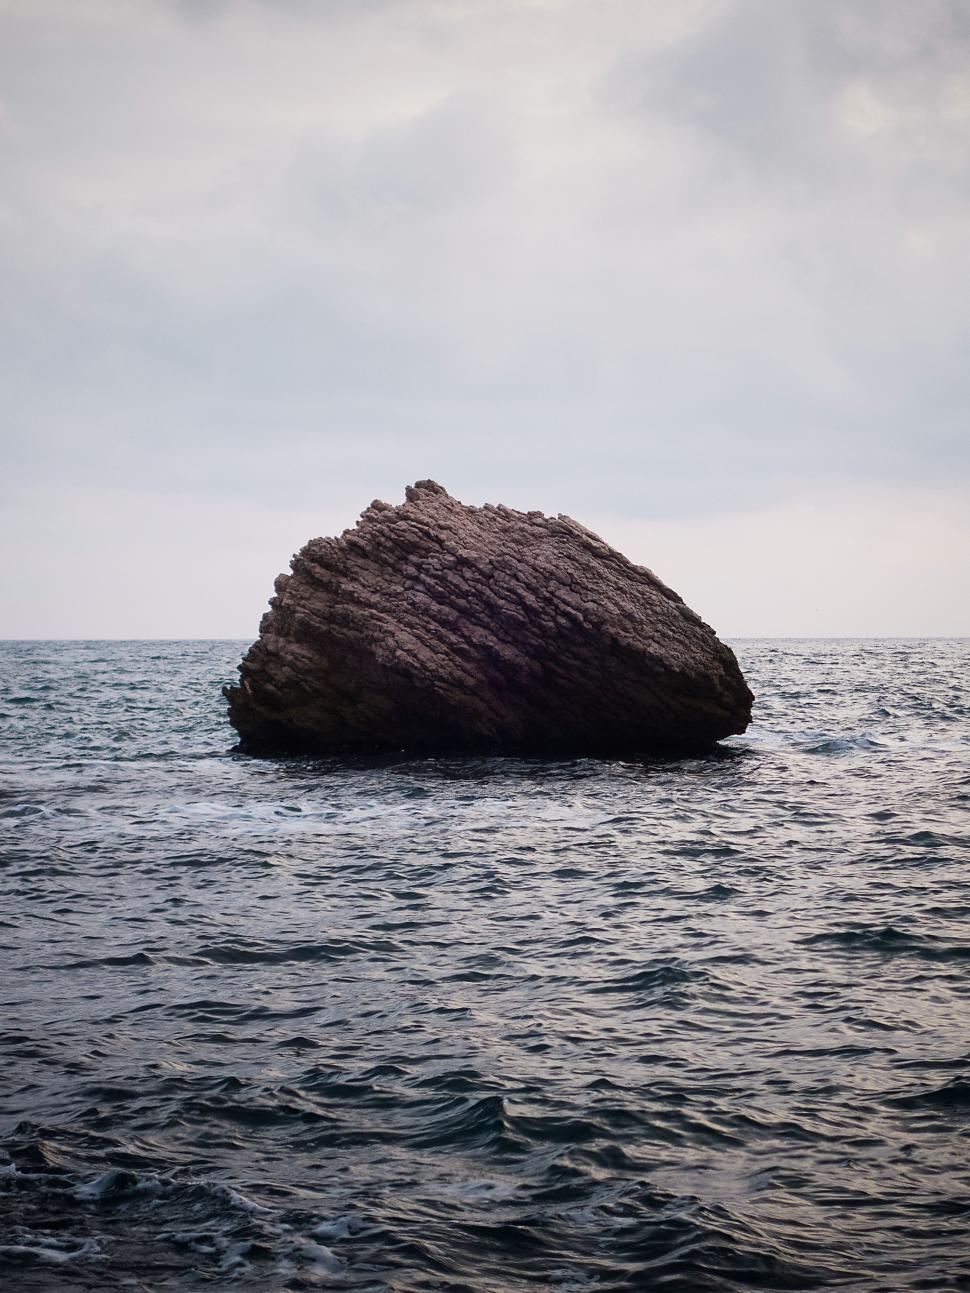 Free Image of Rock Formation in the Middle of the Ocean 